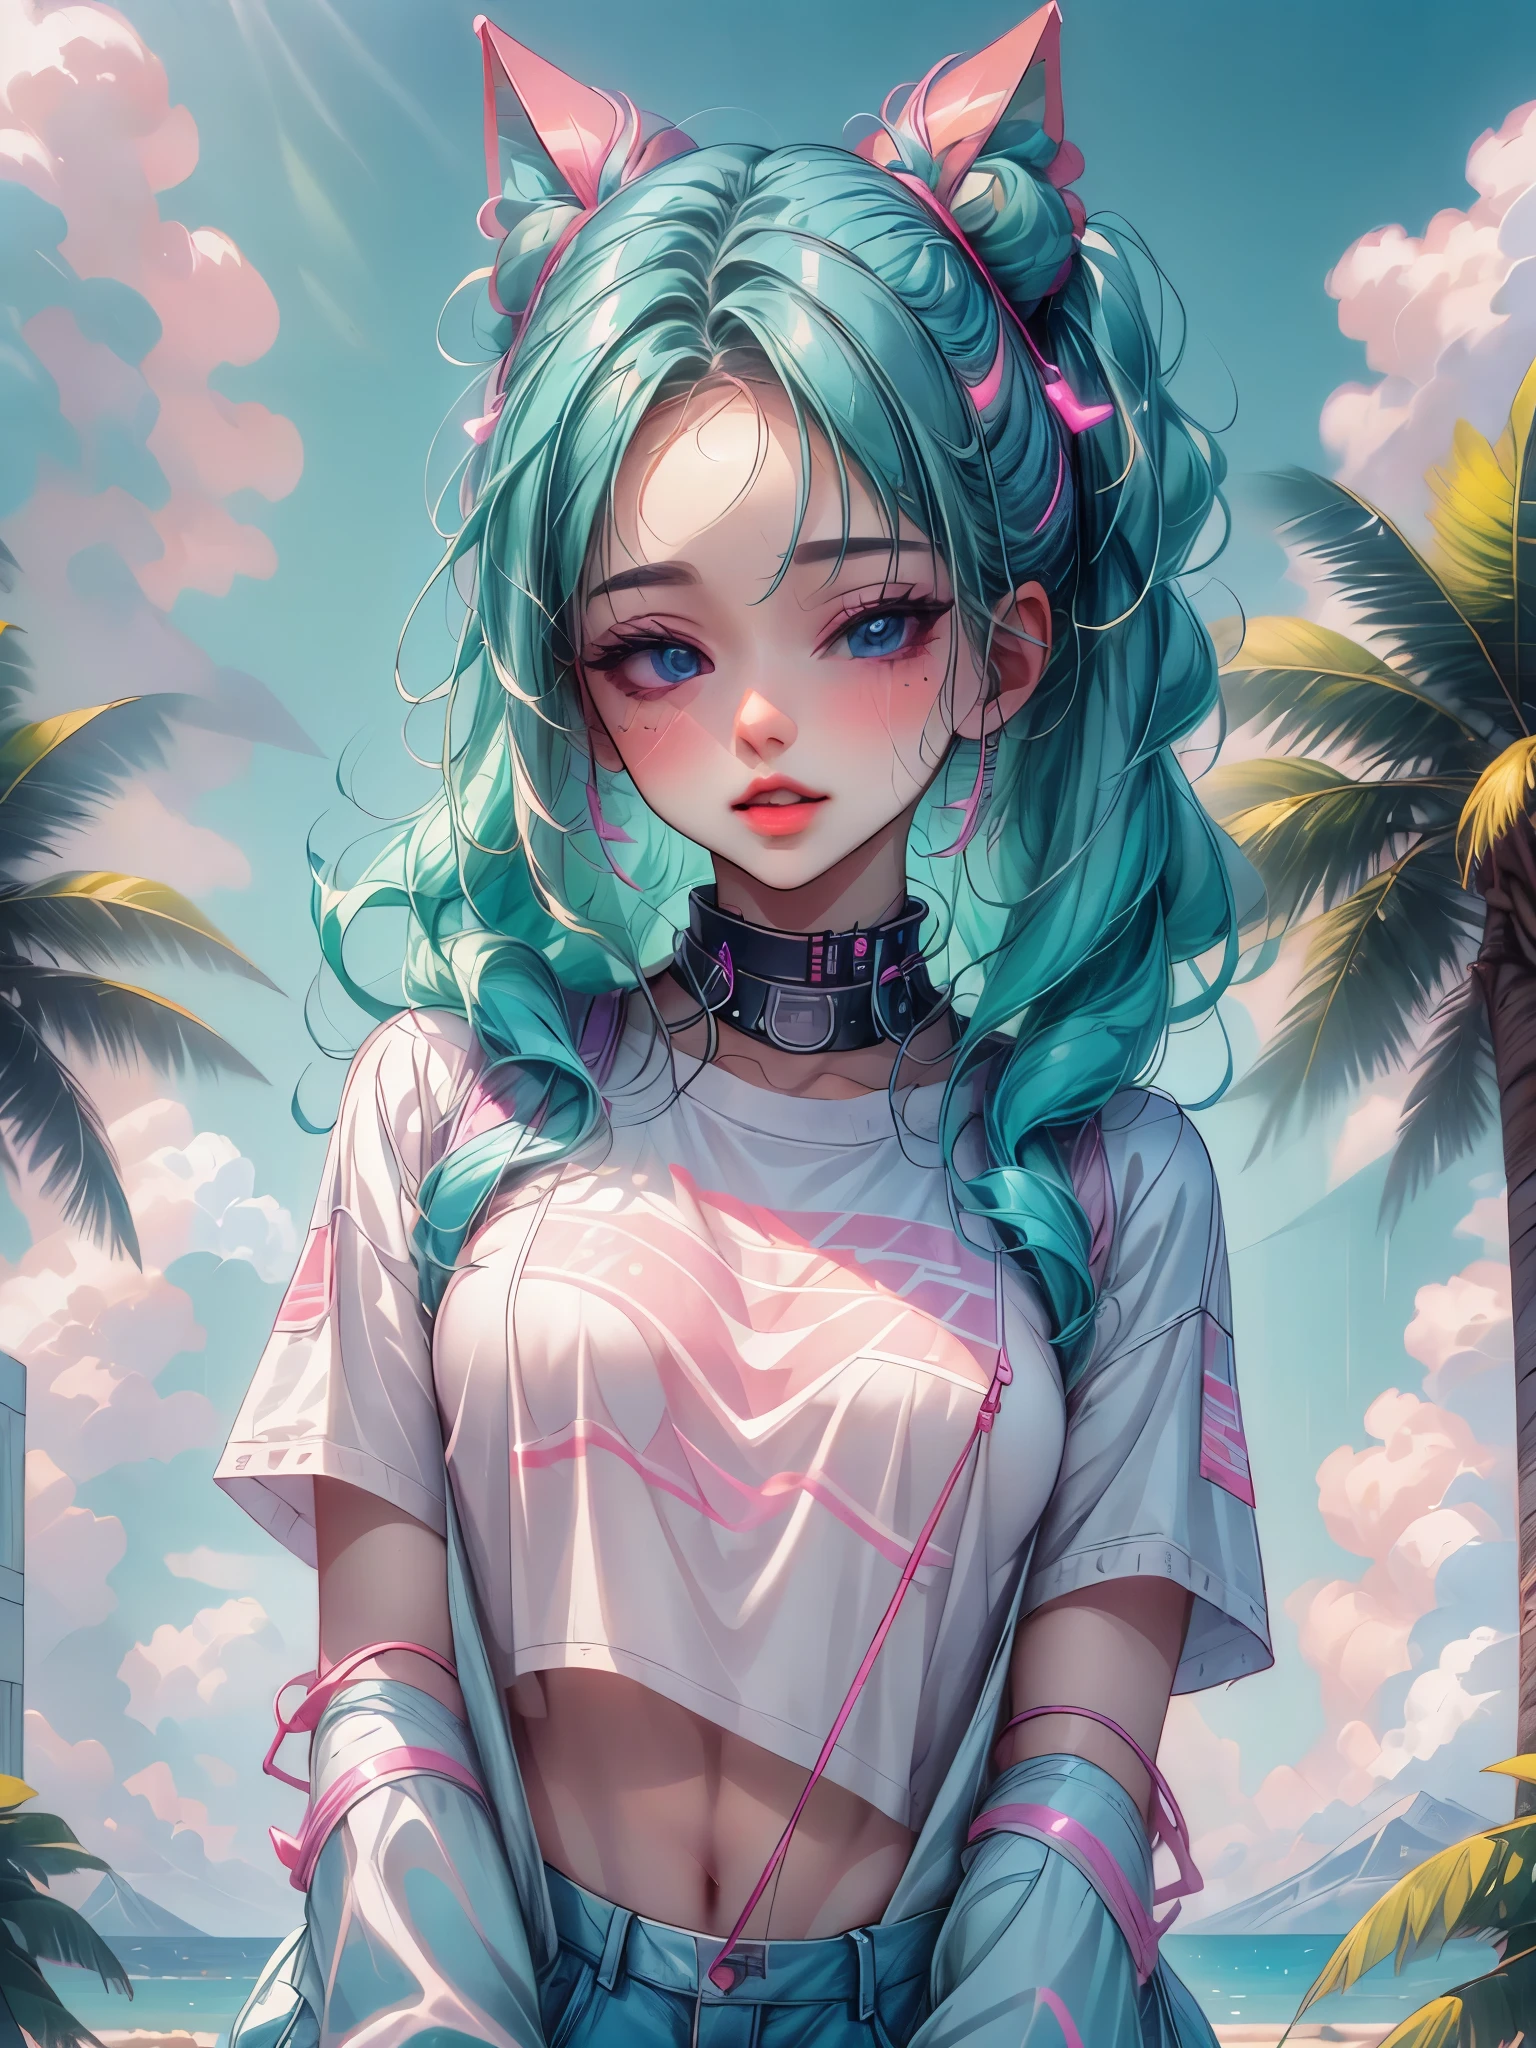 best quality,highres,vivid colors,ultra-detailed,portrait style,vaporwave aesthetic,neon lights,80s vibes,synthesizer sound,retro technology,futuristic cityscape,palm trees,sunset beach,glitch effect,digital art,floating geometric shapes
